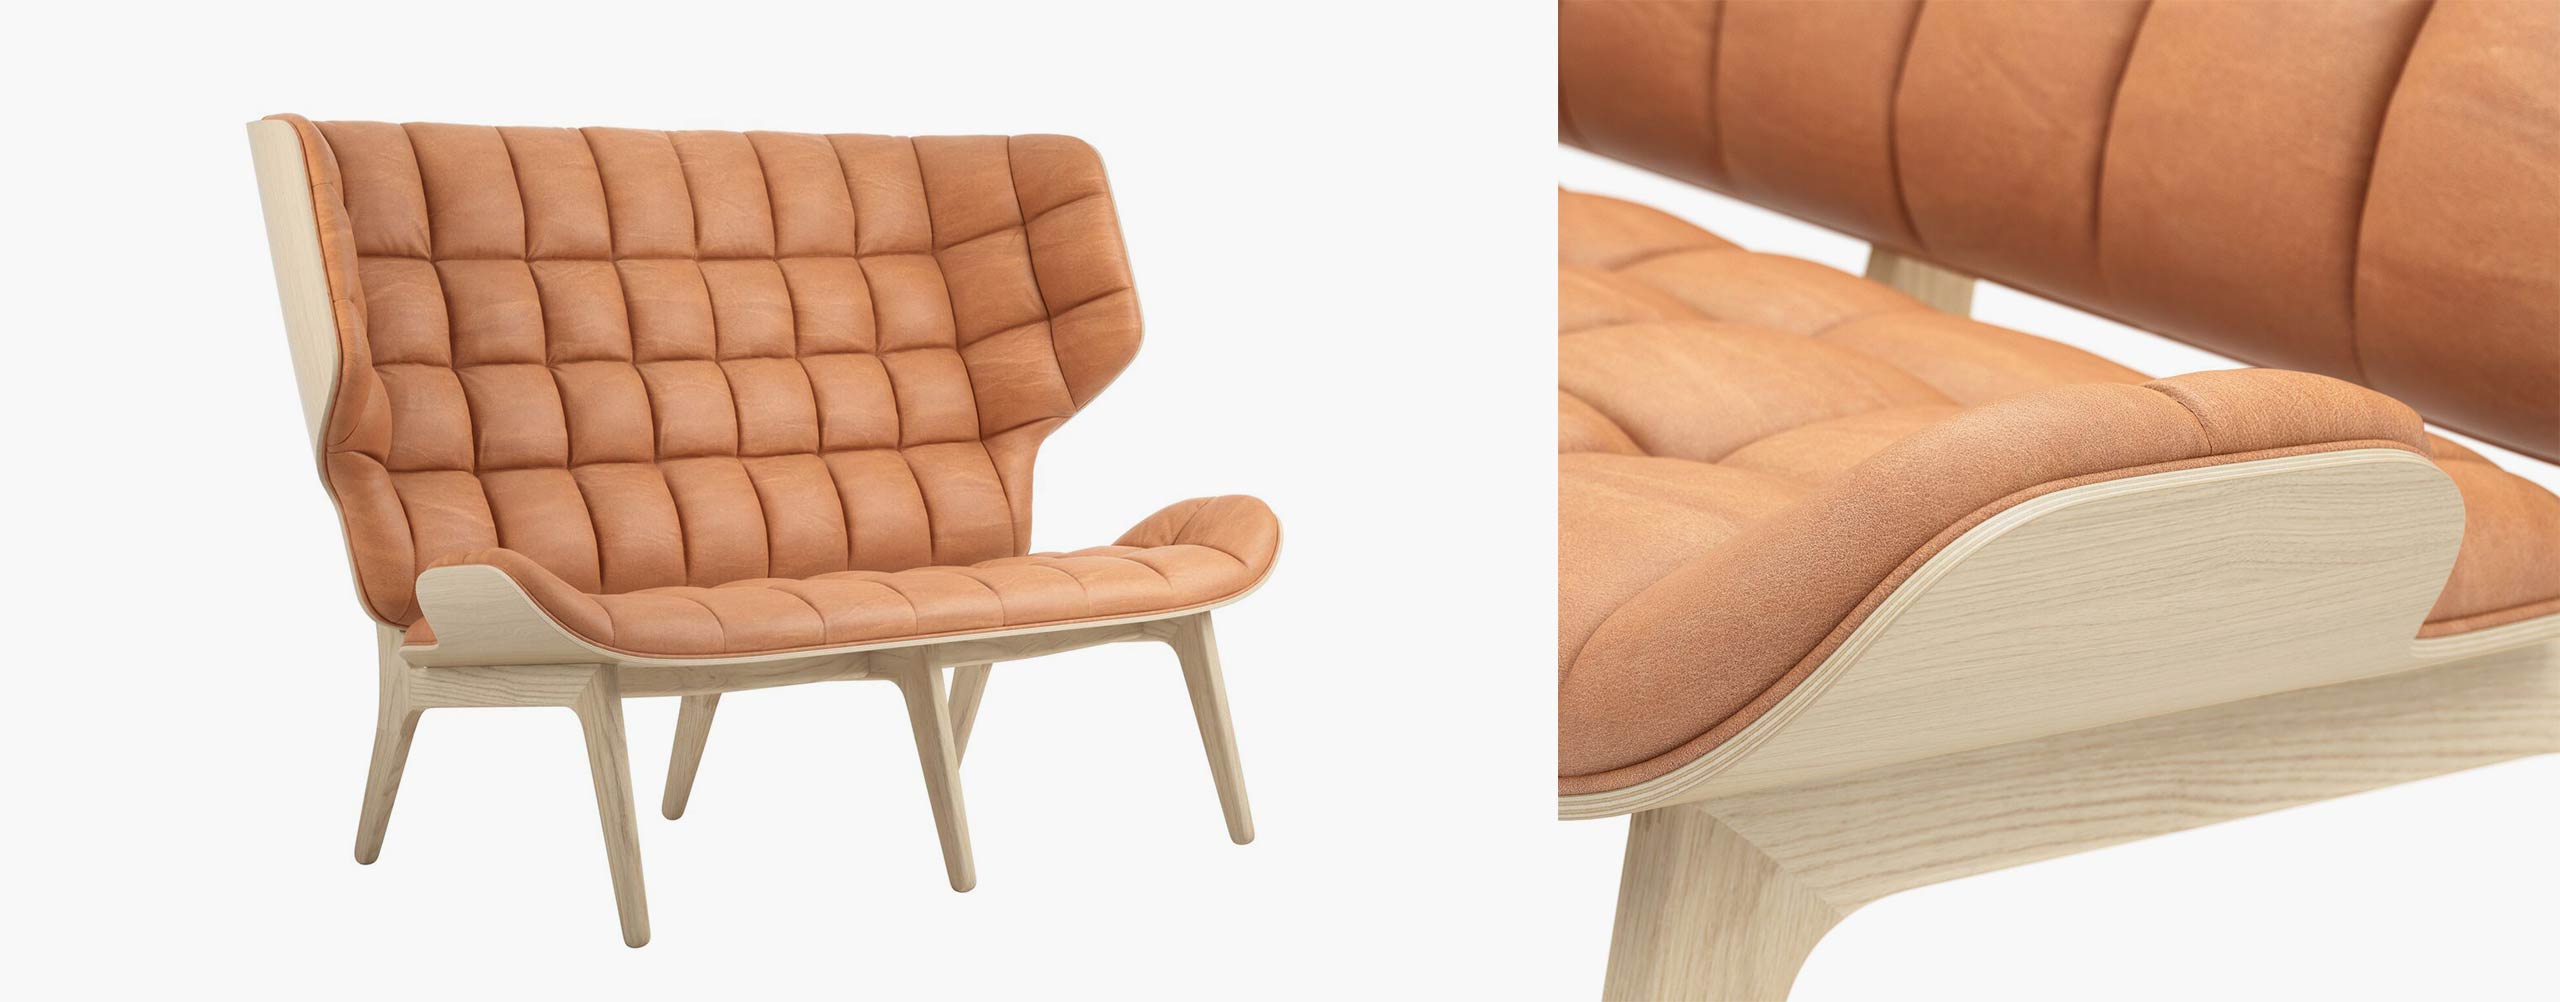 Close-up and full view at NORR11's Mammoth sofa - CGI and 3d model by Design Connected